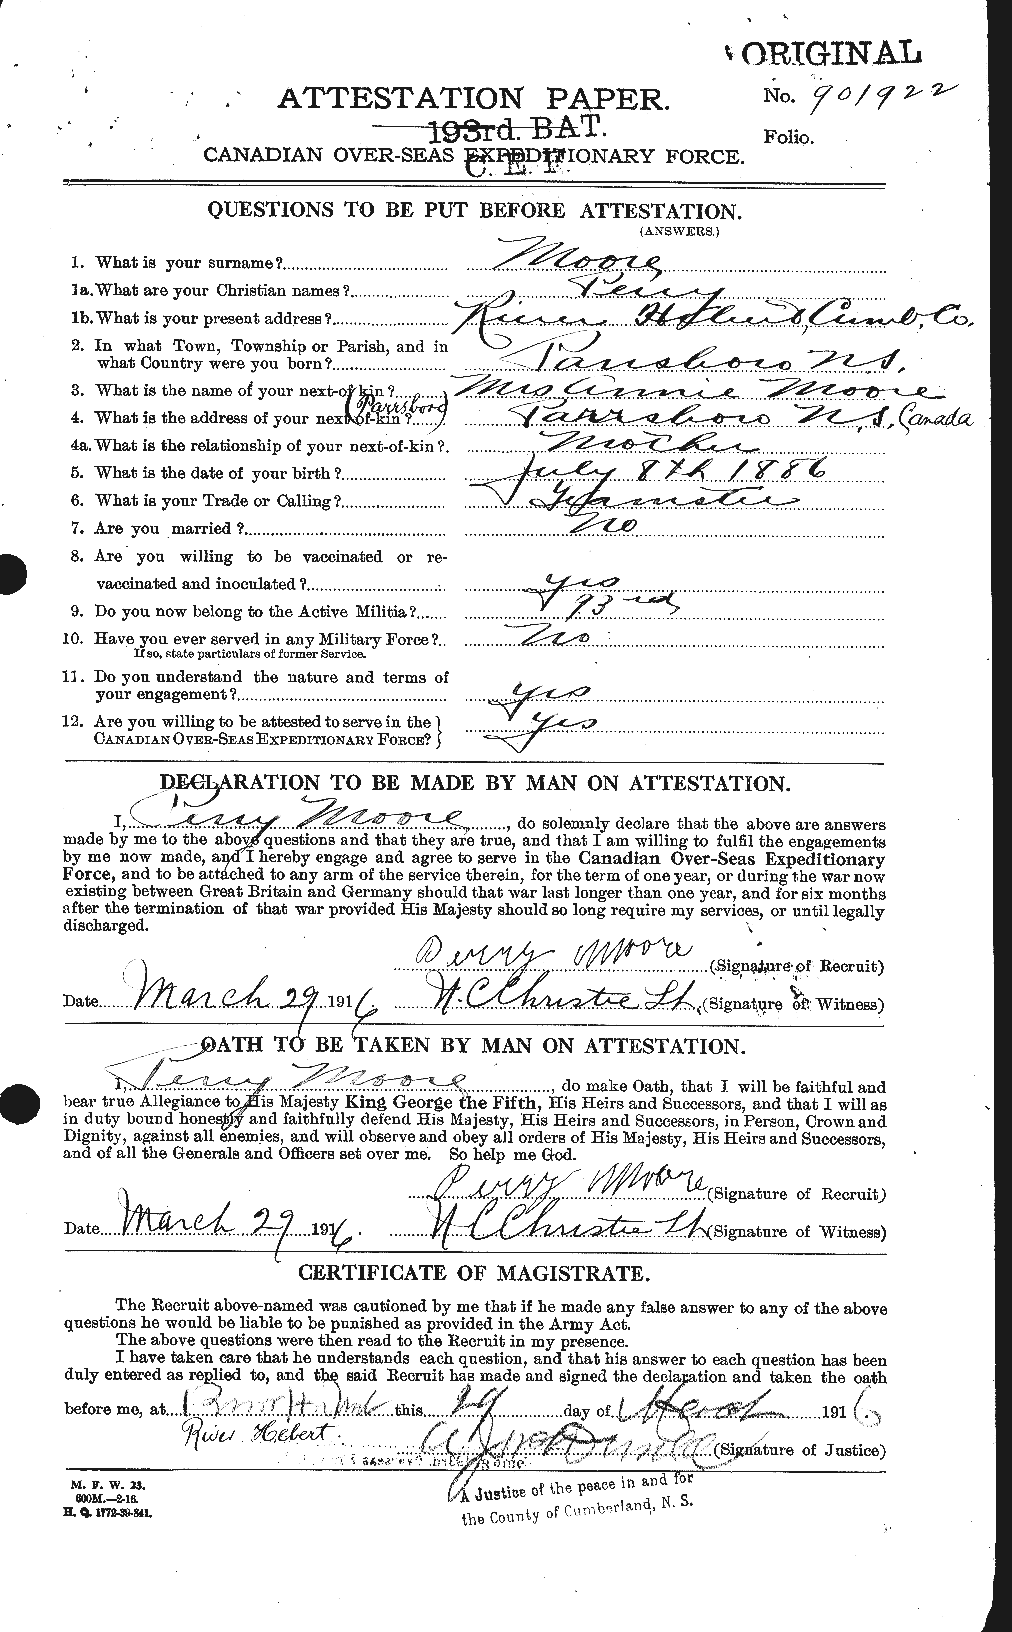 Personnel Records of the First World War - CEF 503492a